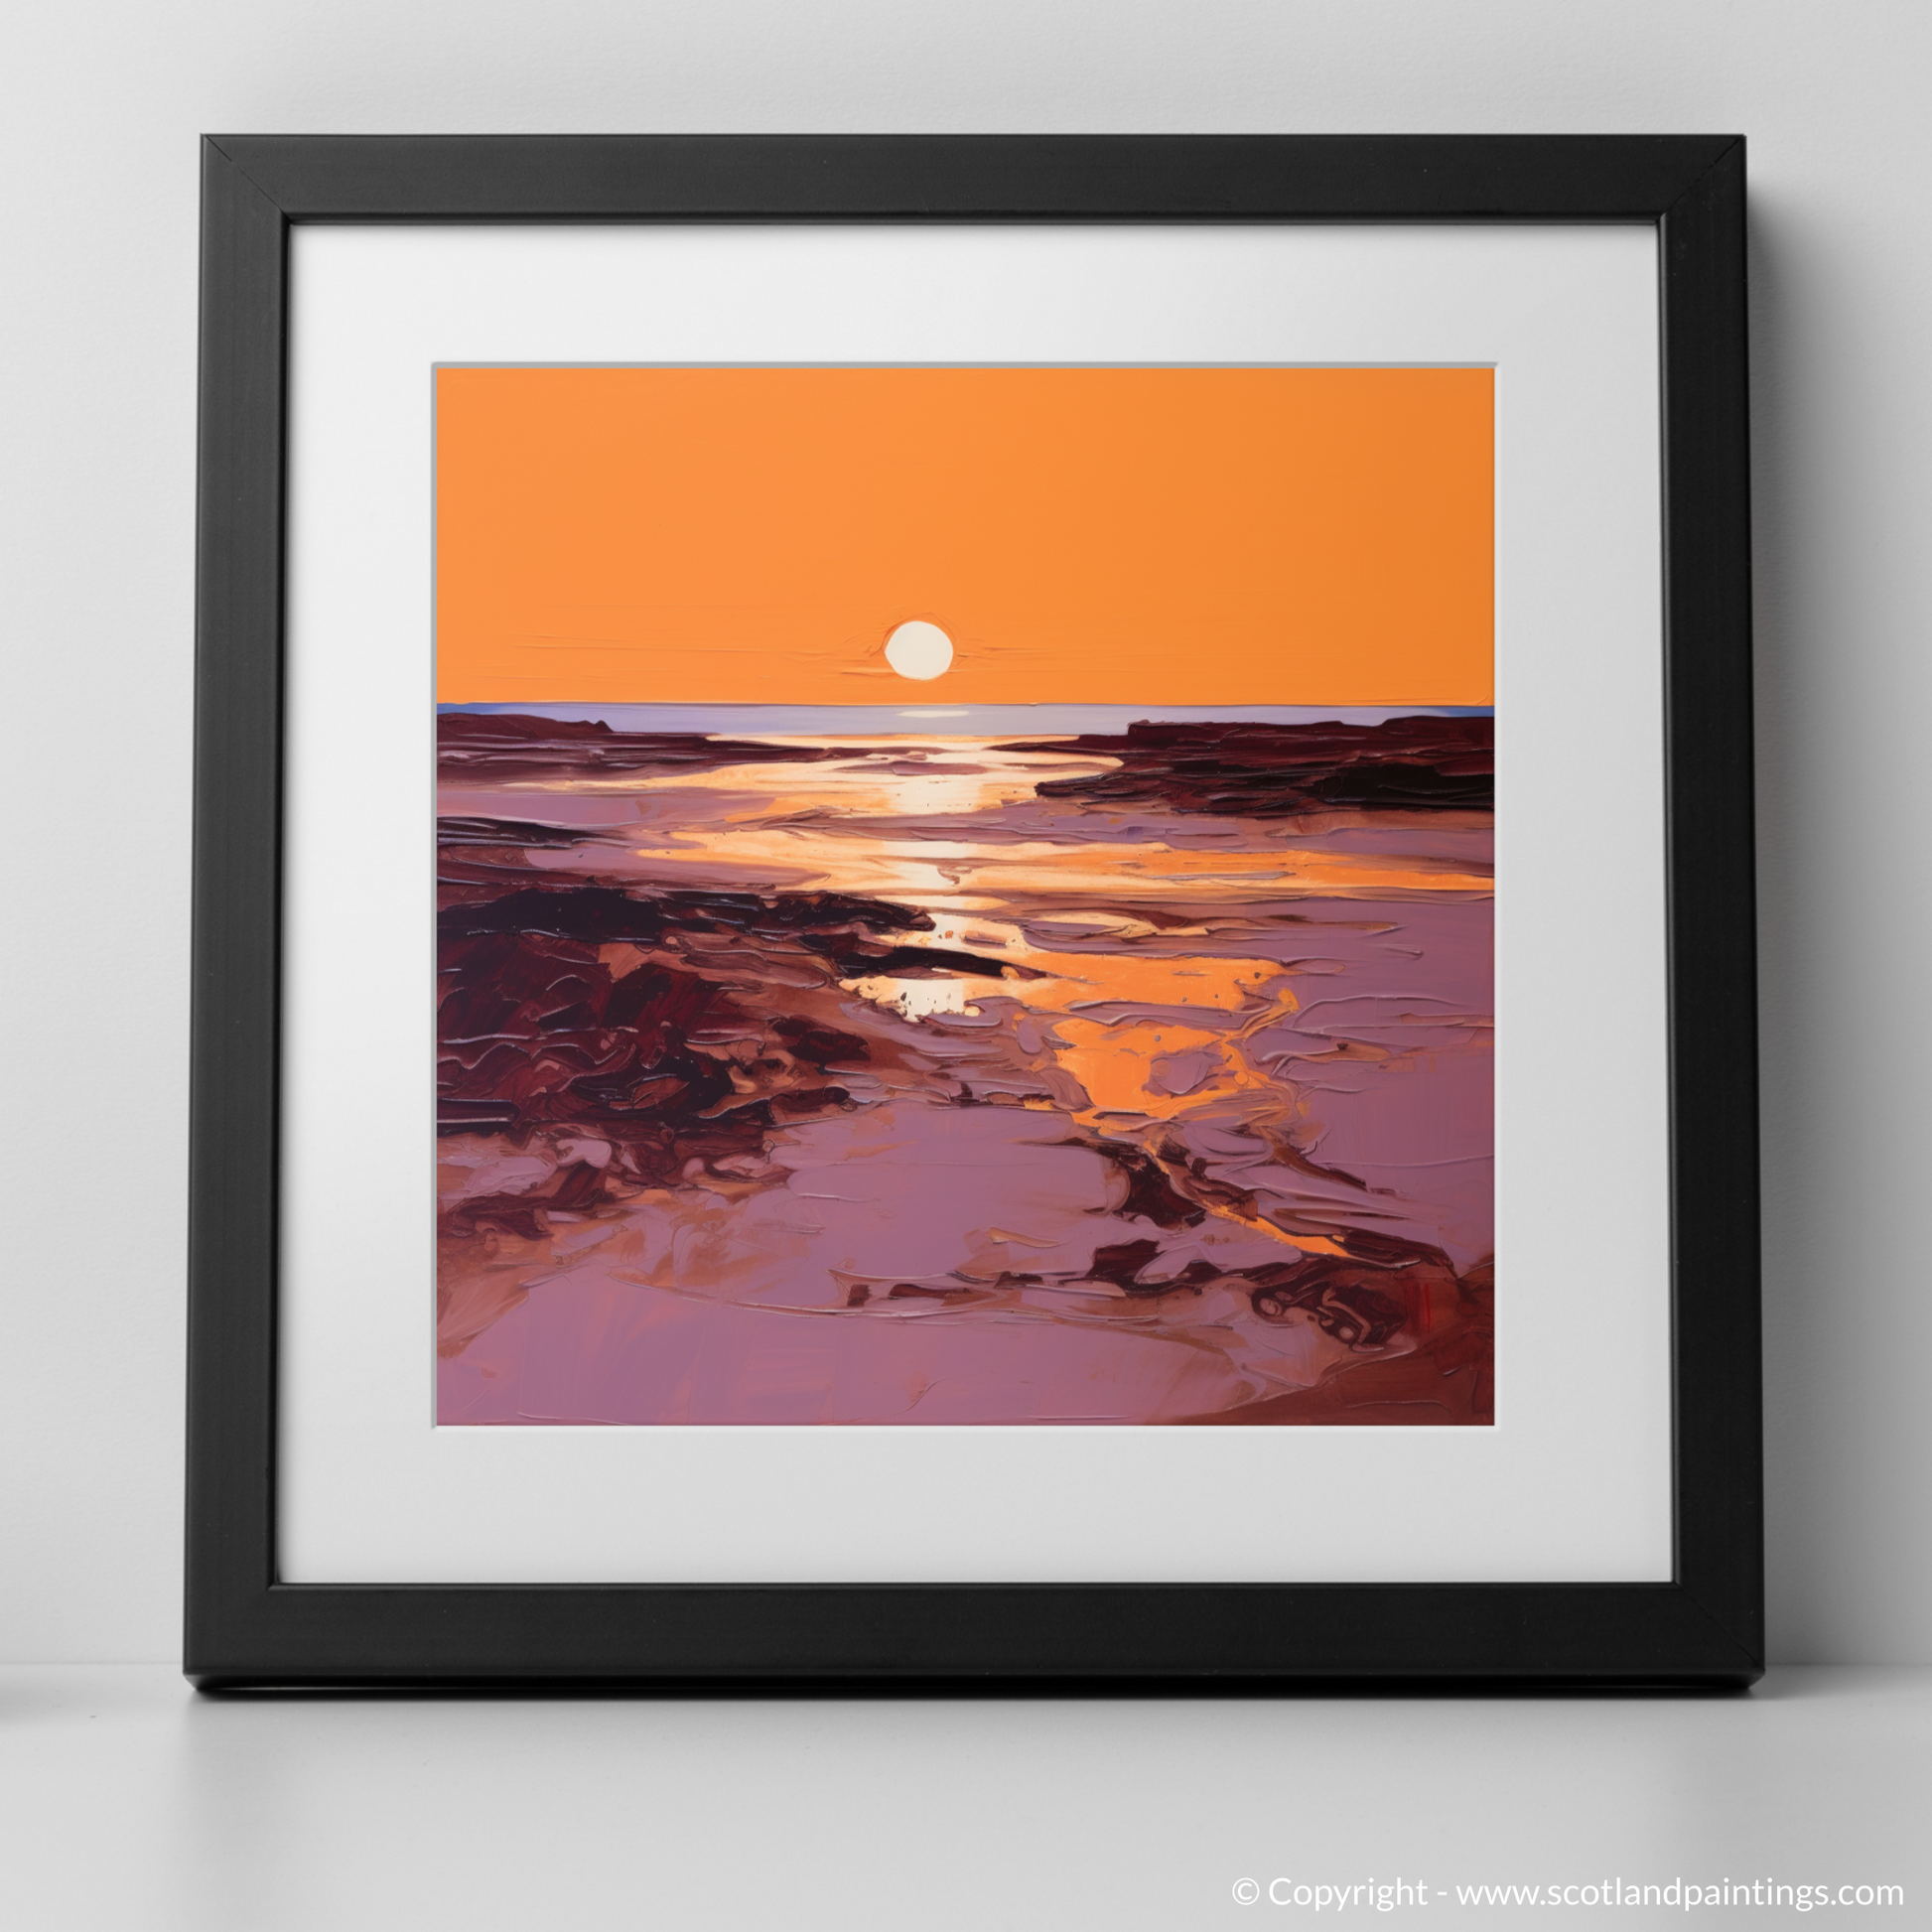 Art Print of Balmedie Beach at golden hour with a black frame